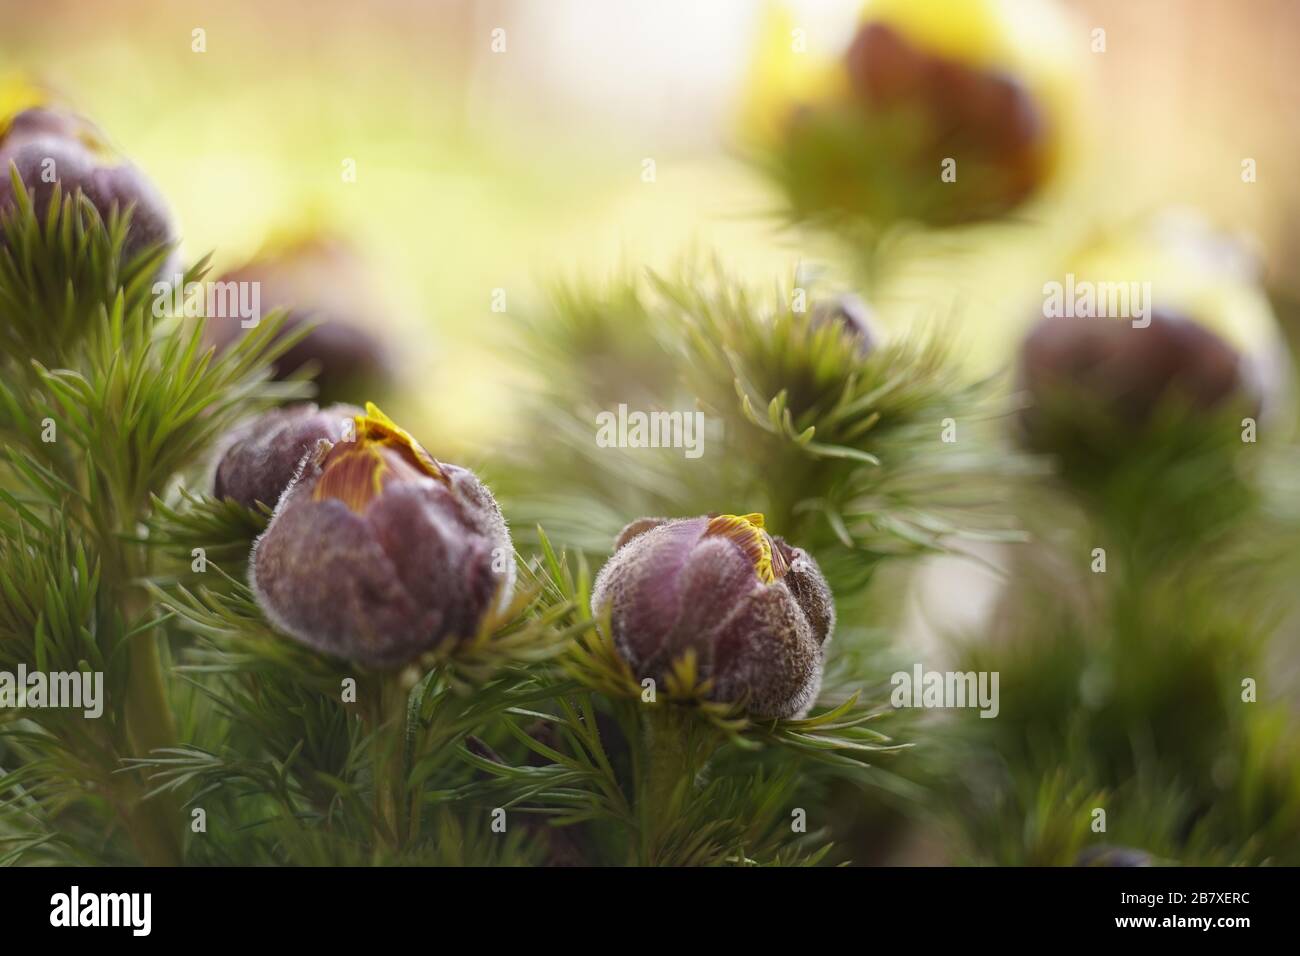 Adonis vernalis flowers grow in the spring garden. Closed young buds in lush green foliage Stock Photo